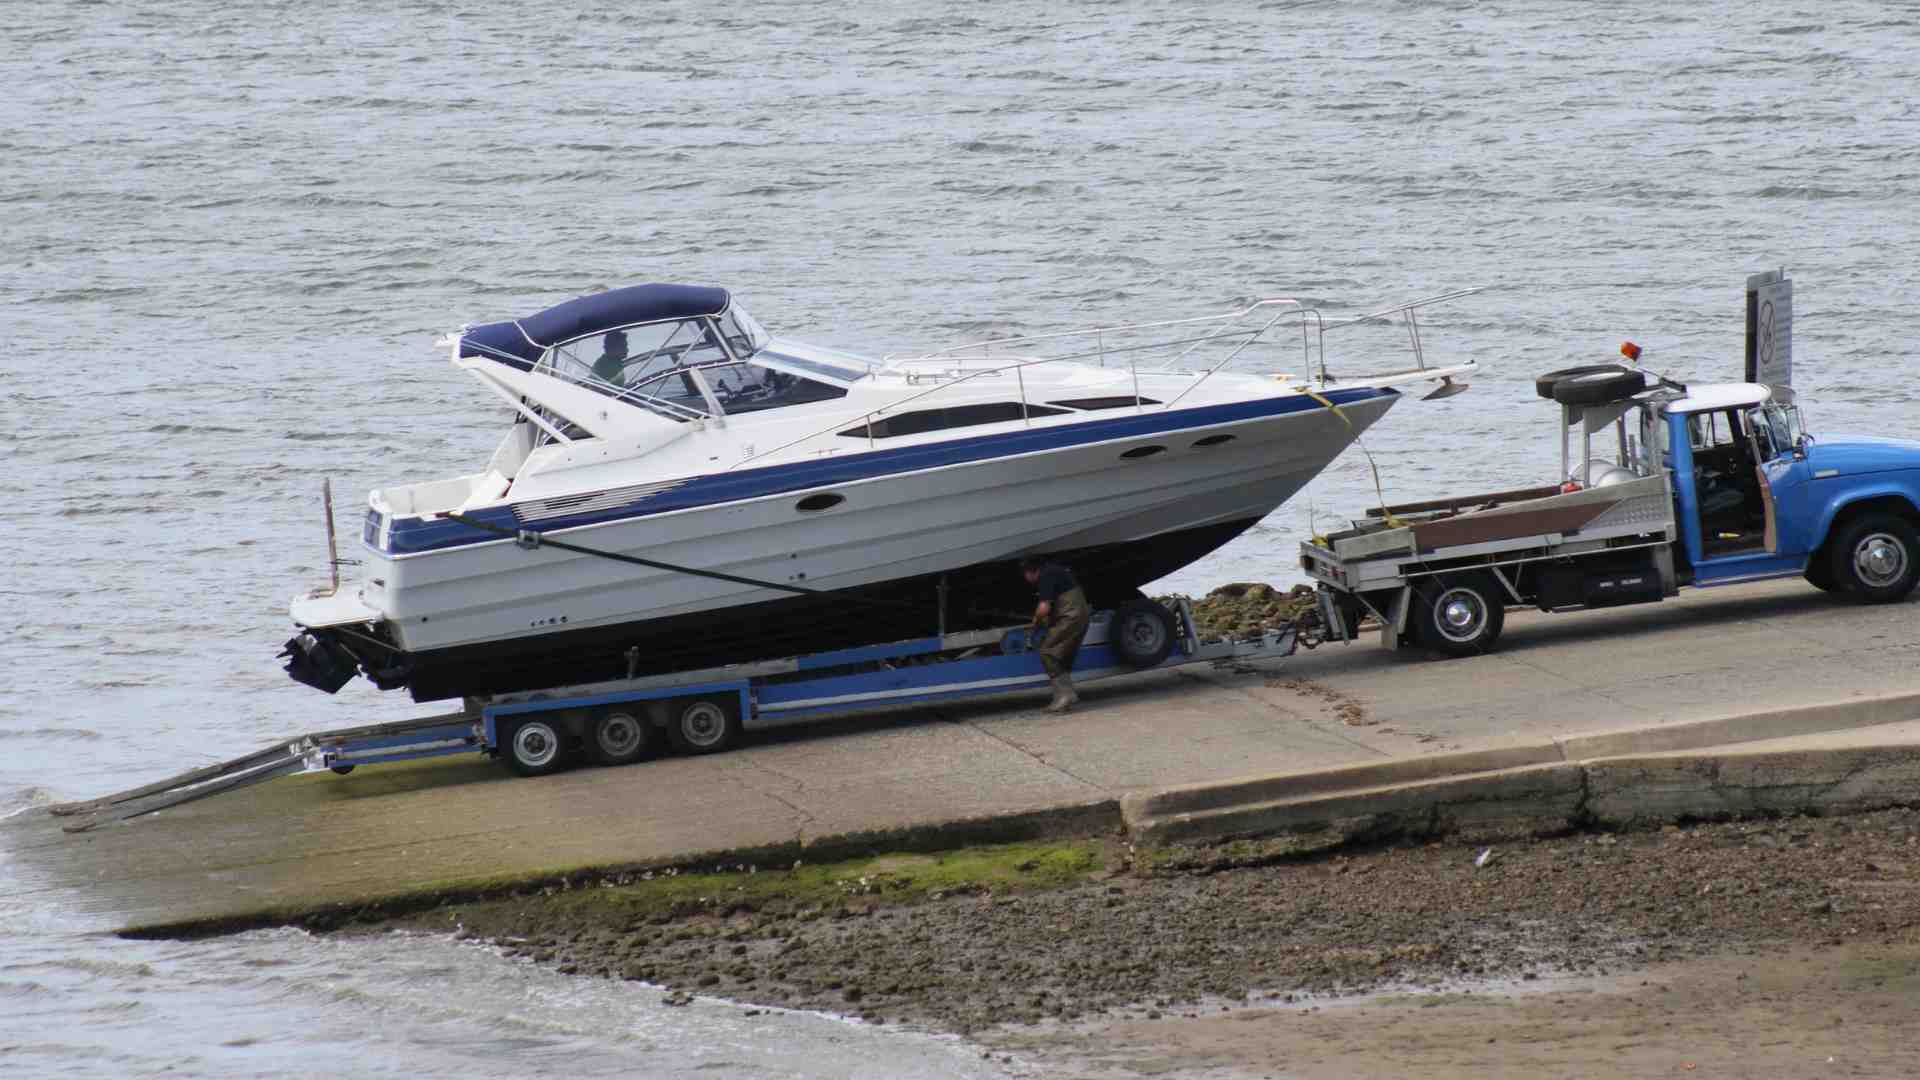 What are the steps to properly trailer a boat and launch it at a ramp